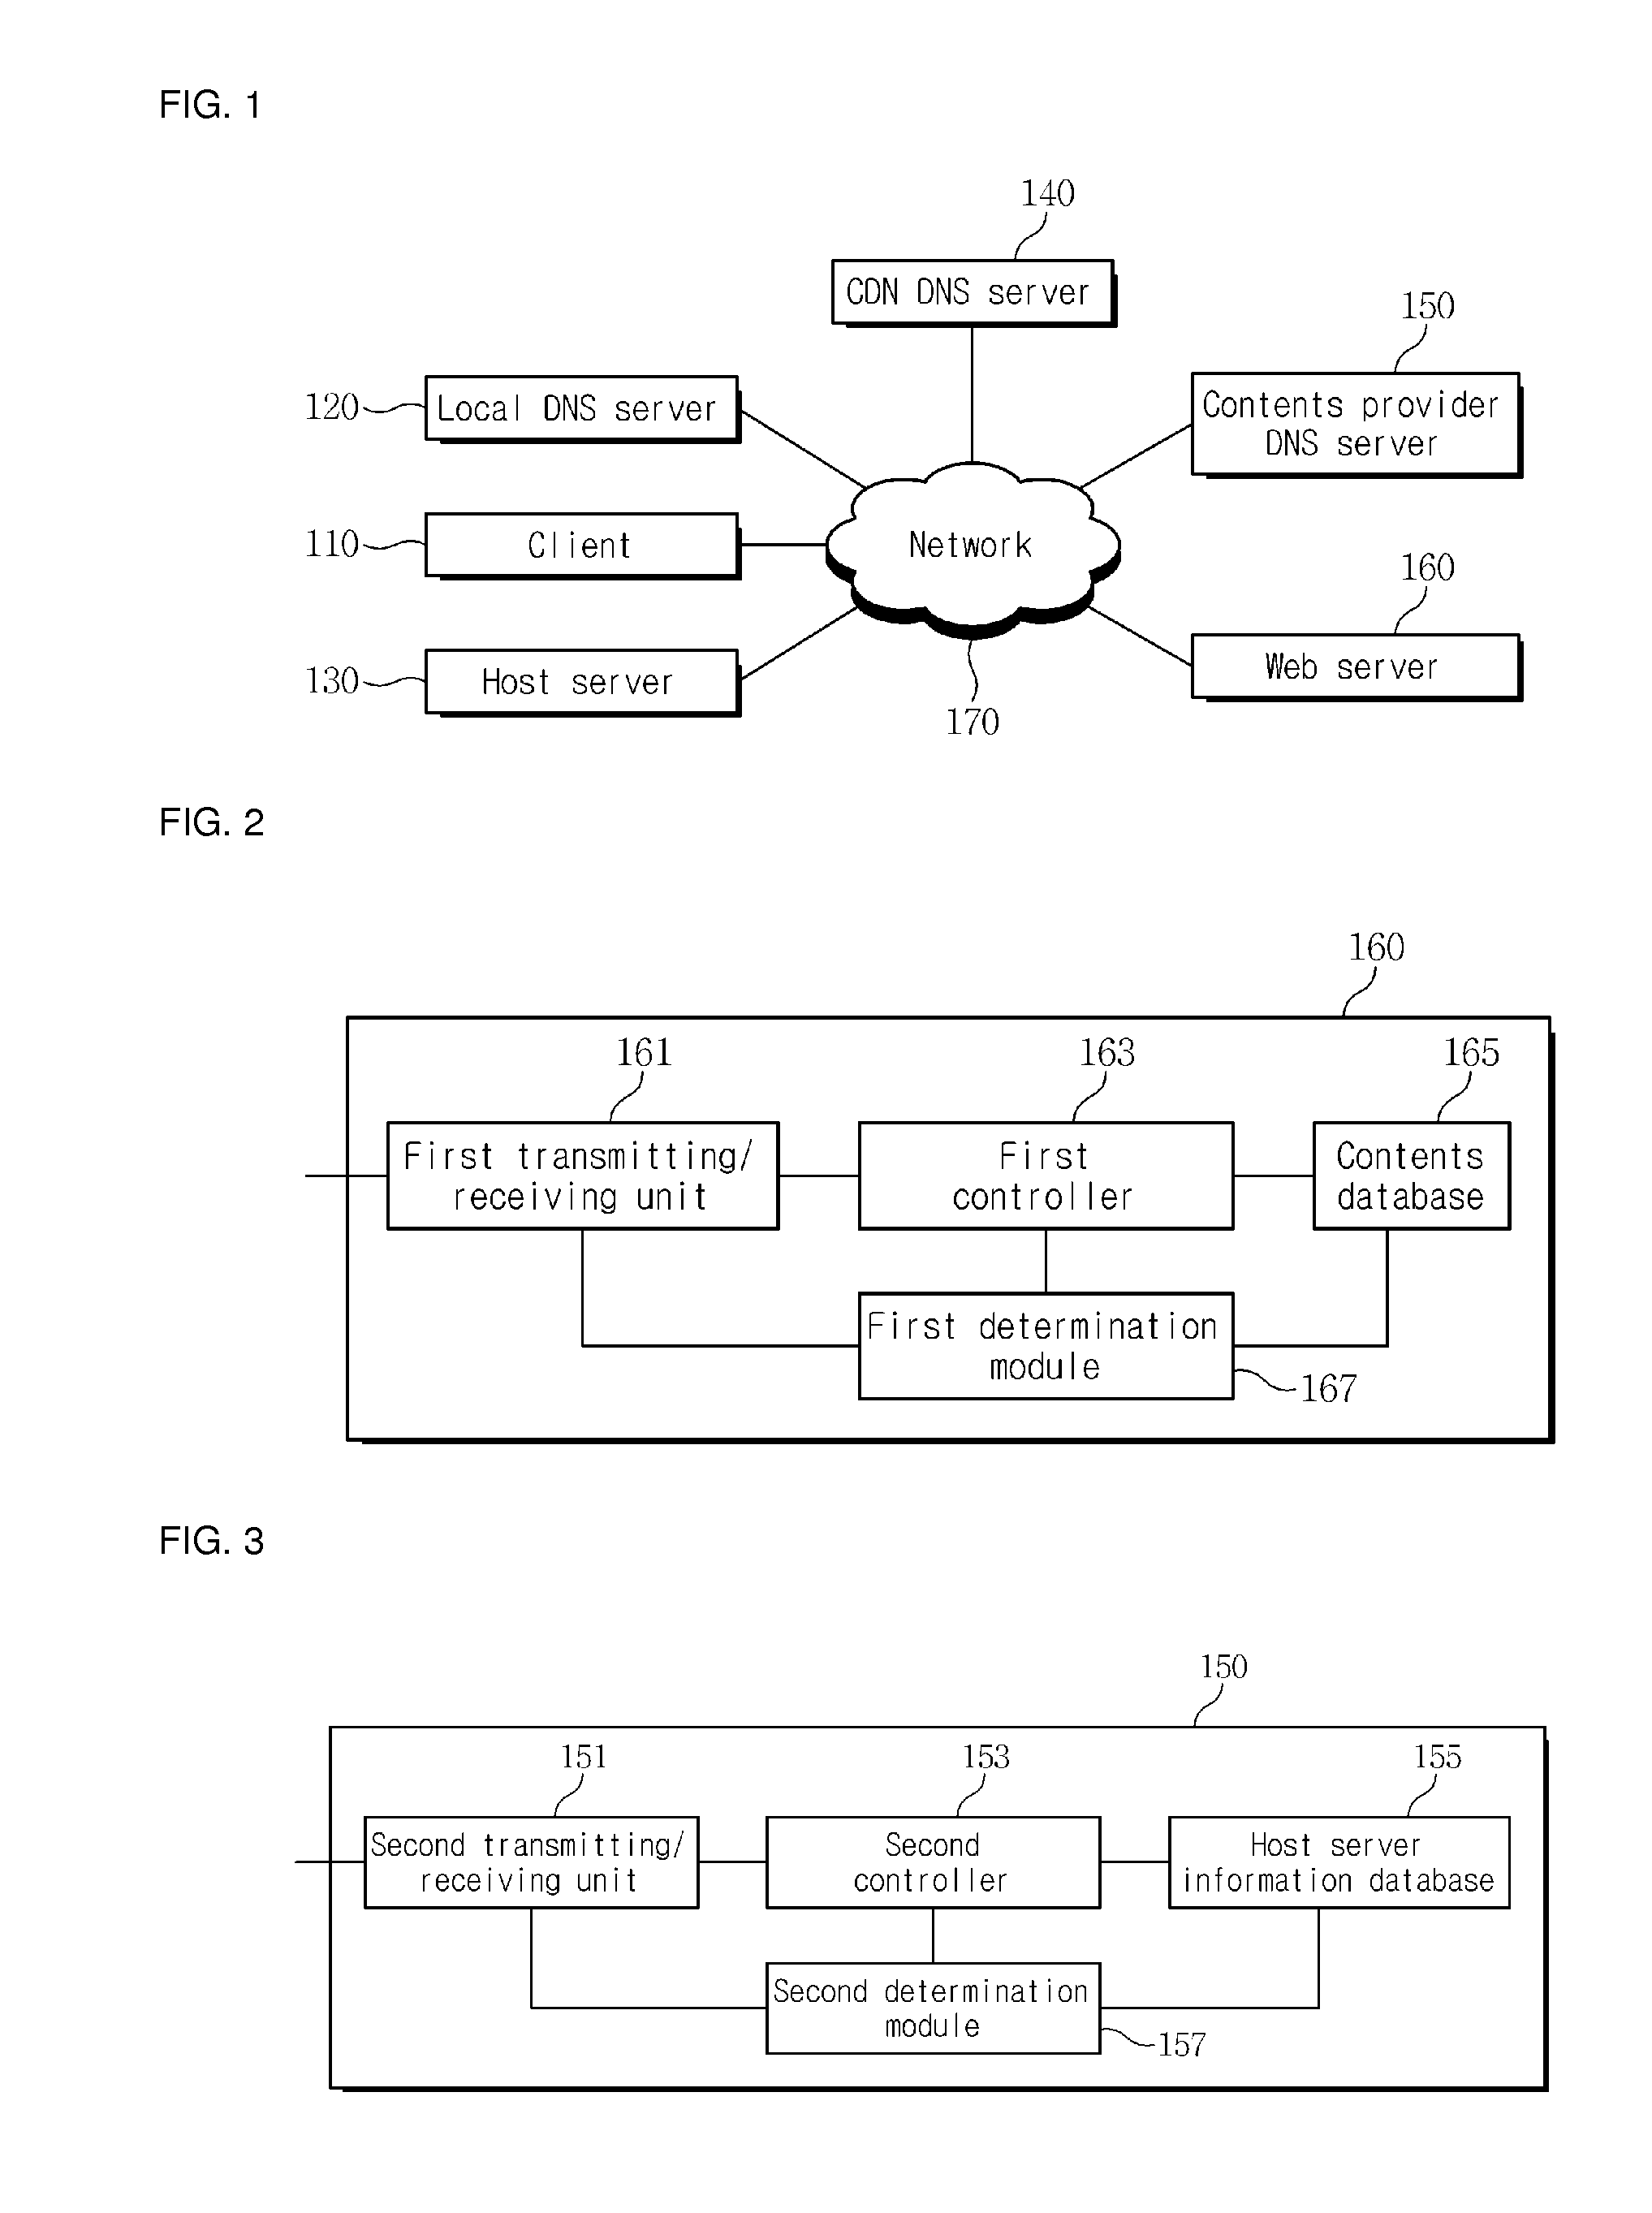 Contents delivery system and method, web server and contents provider DNS server thereof